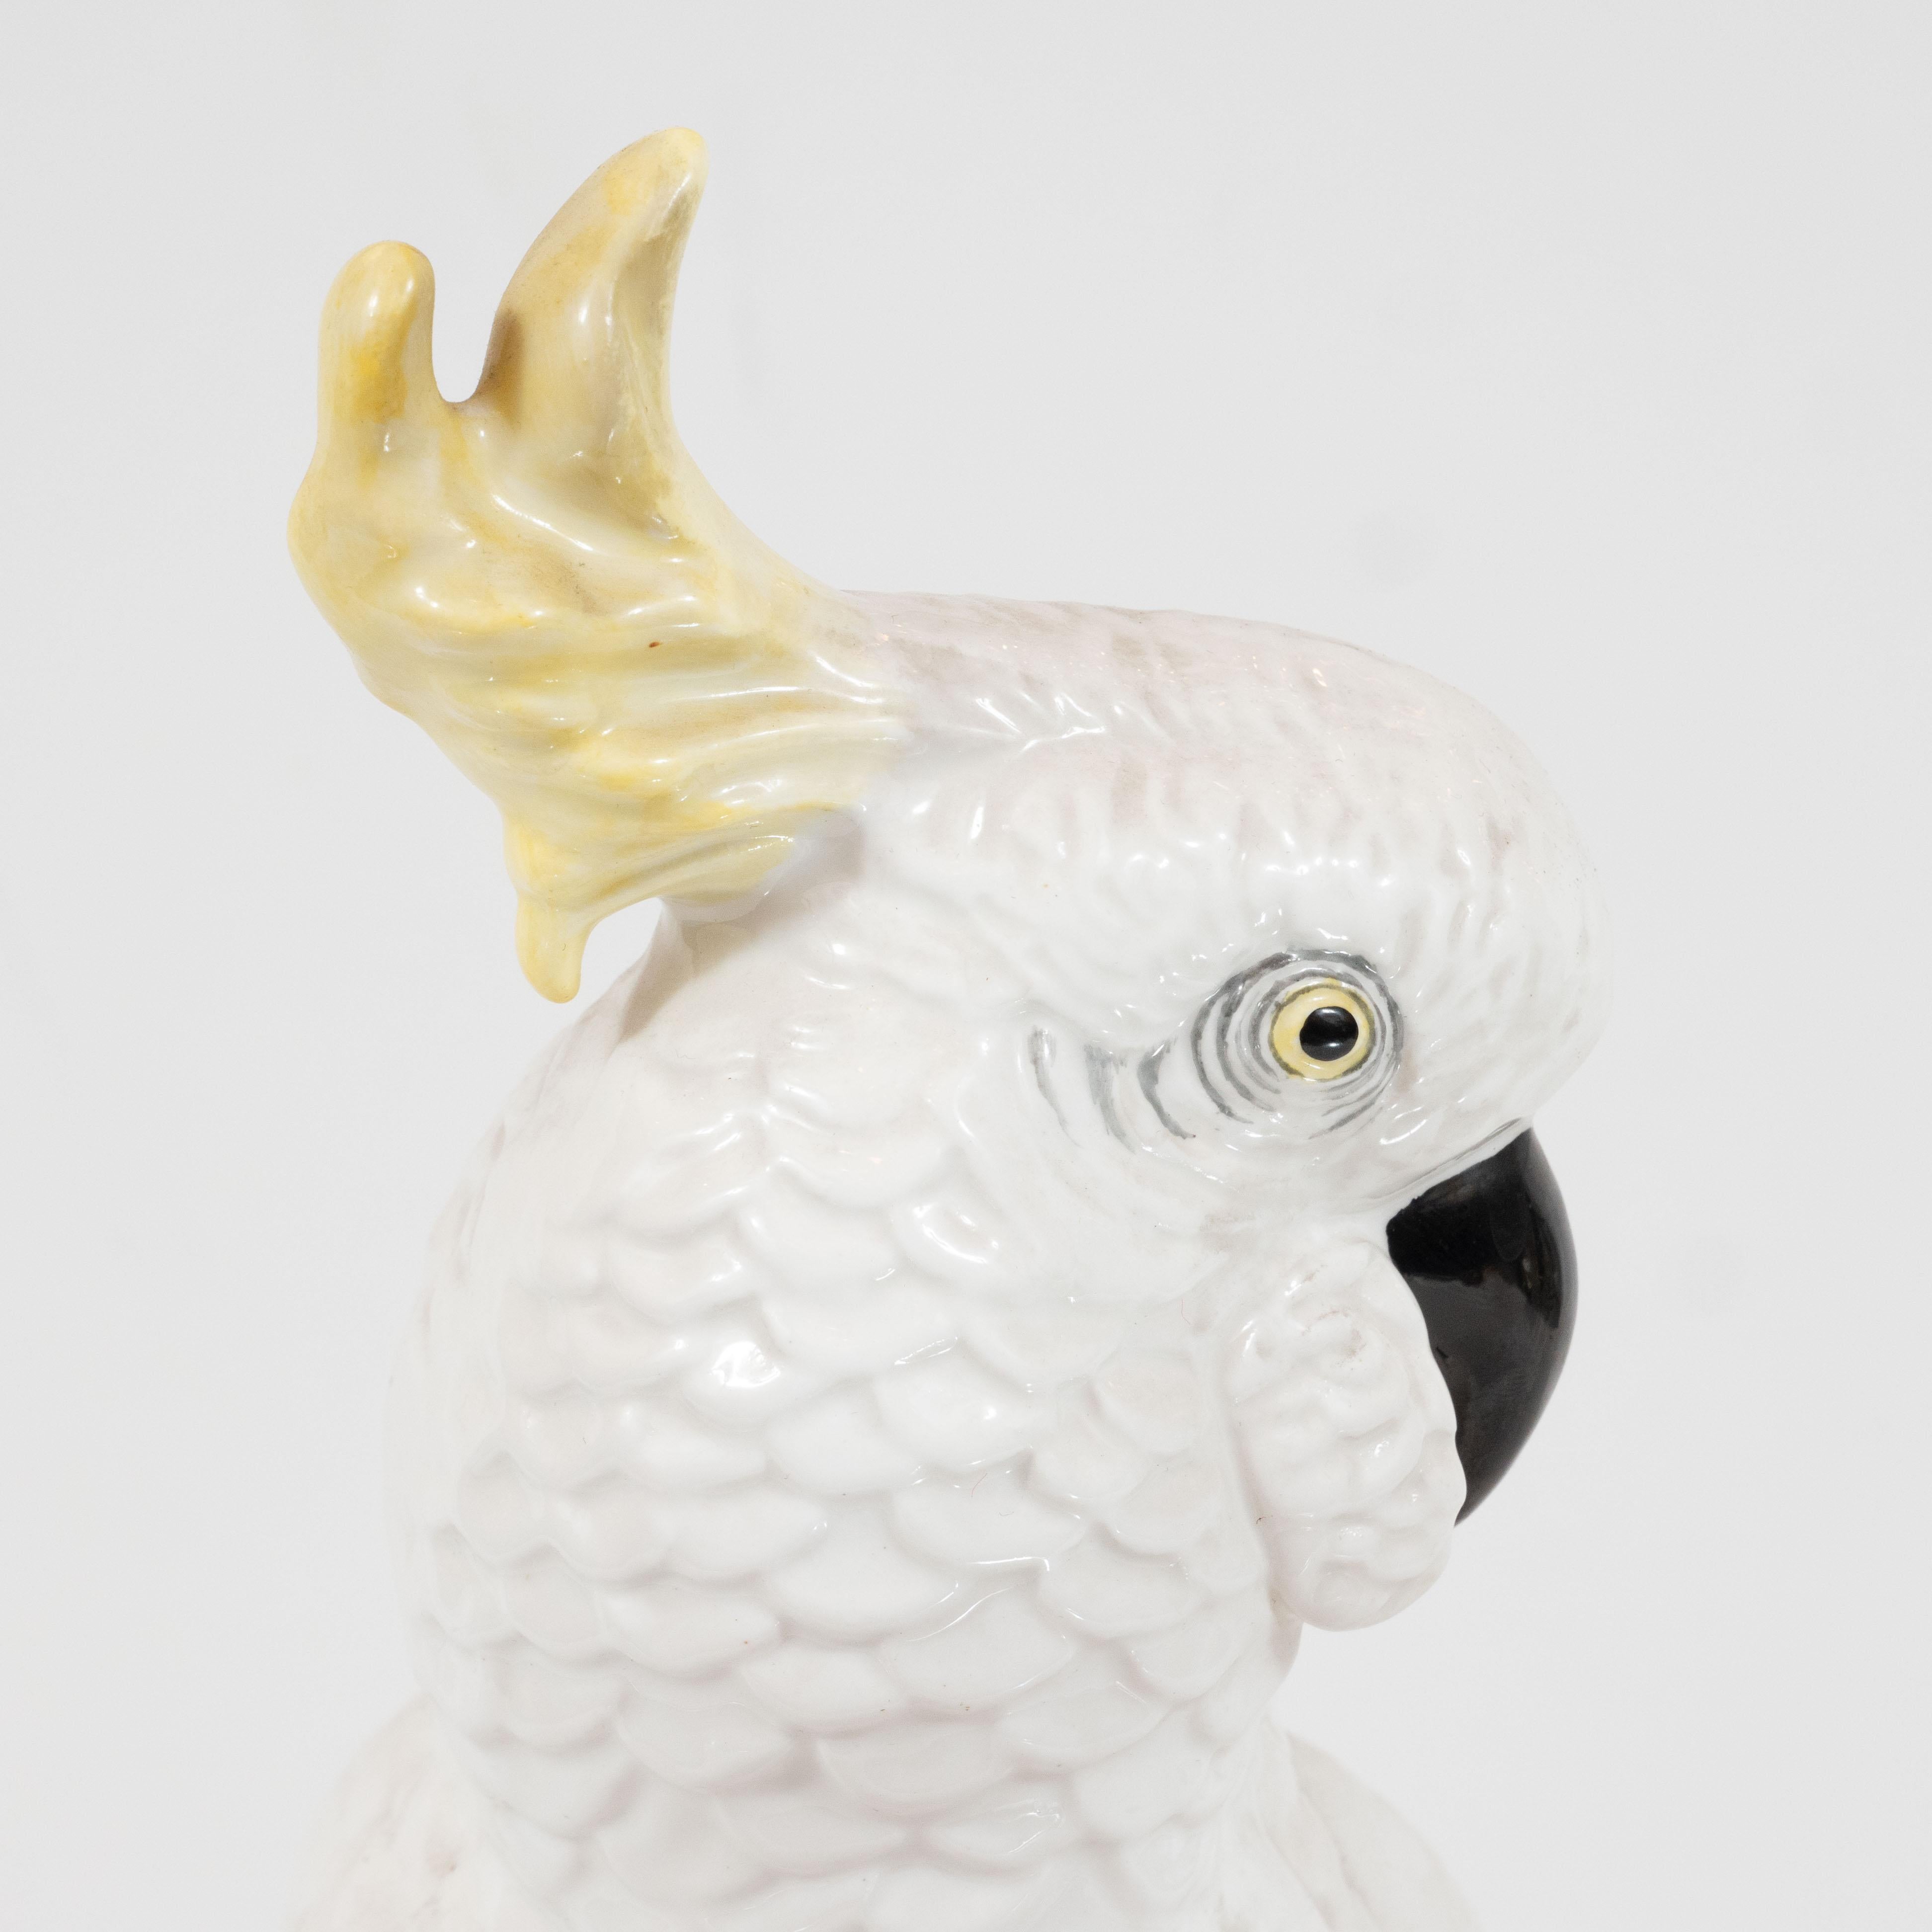 Mid-20th Century Mid-Century Modern White Porcelain Cockatoo by T.J. Jones for Staffordshire